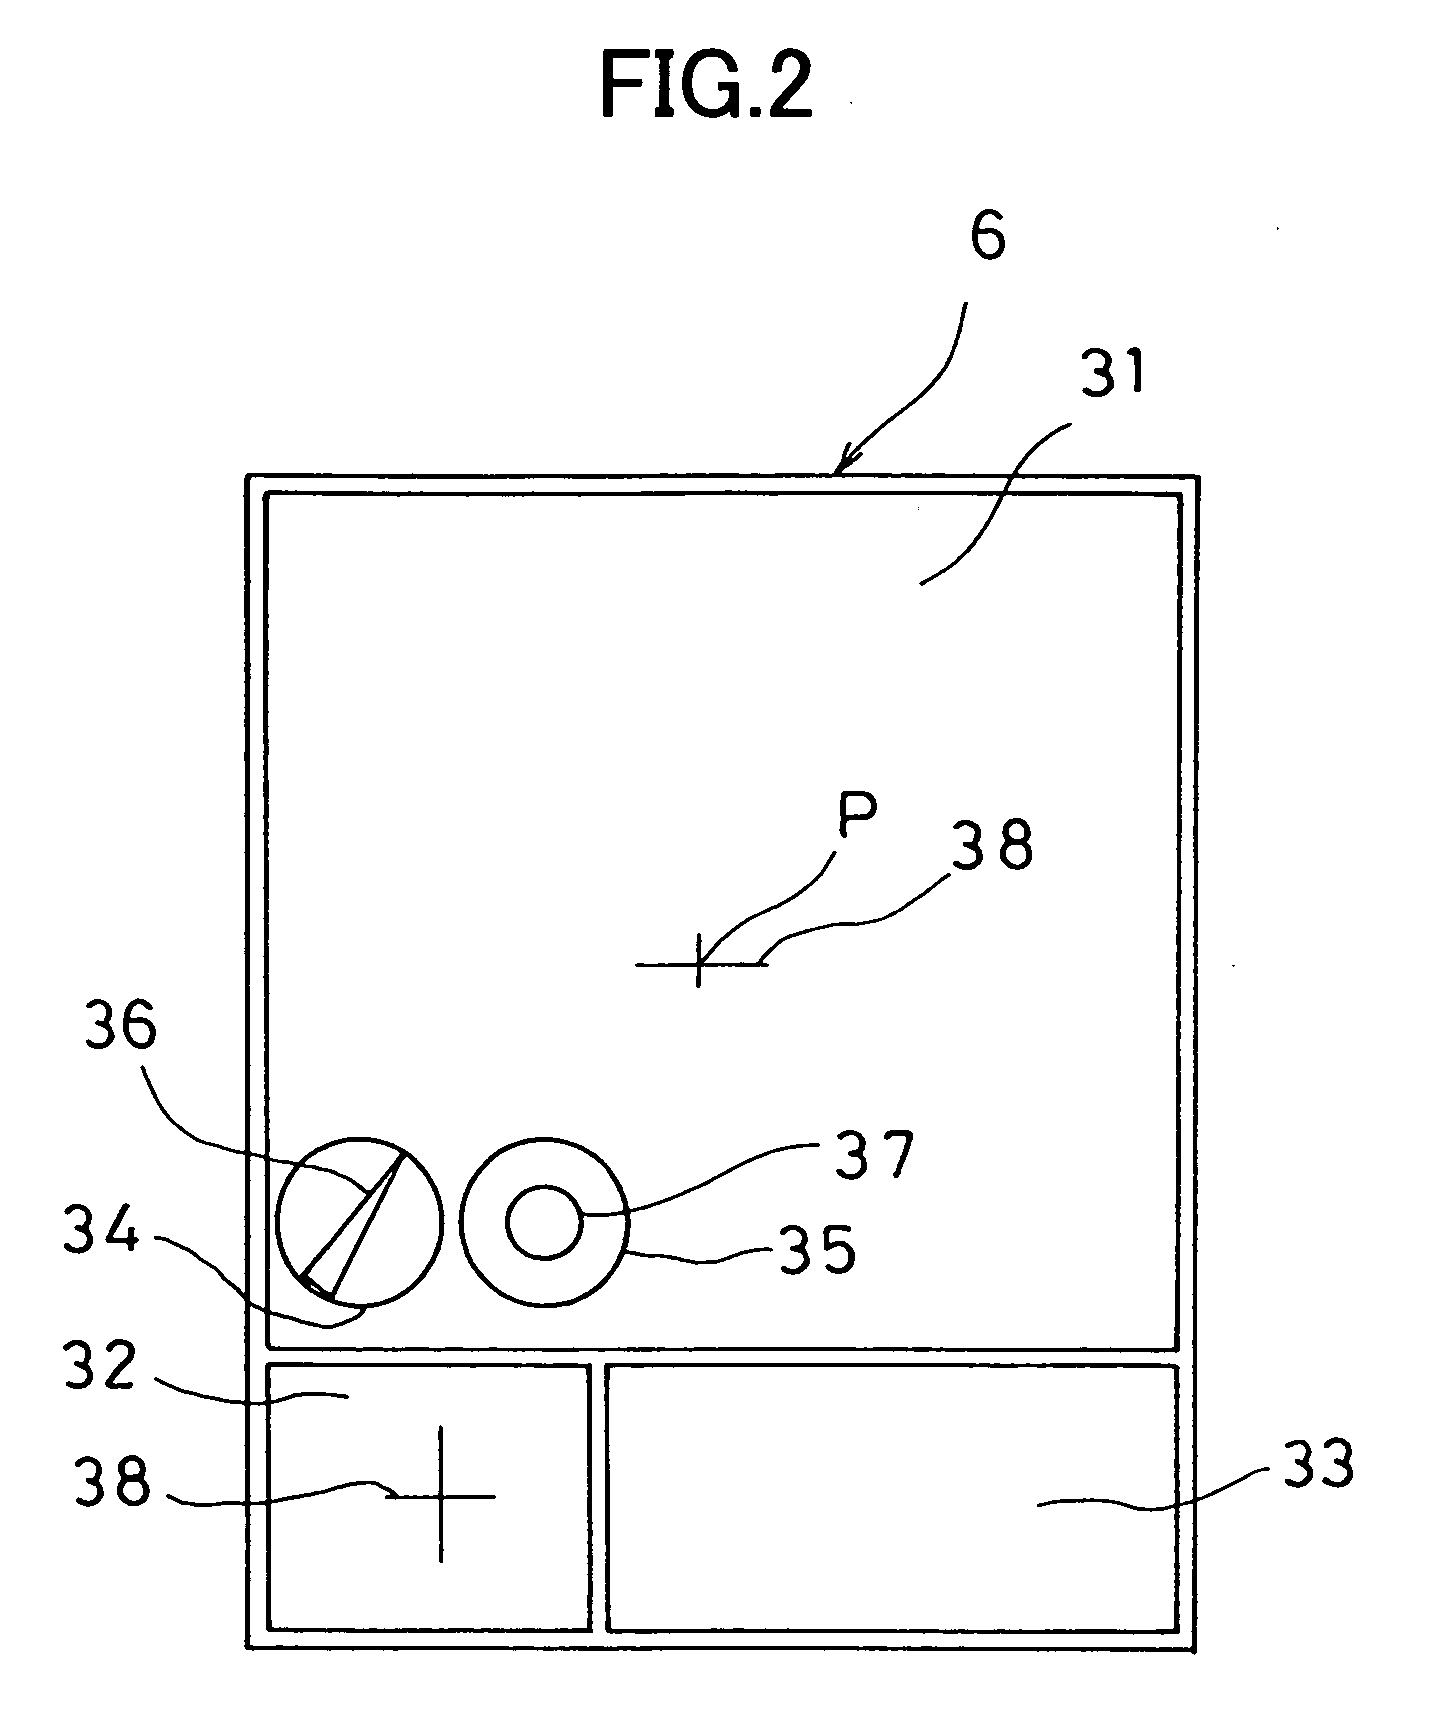 Geographical data collecting device